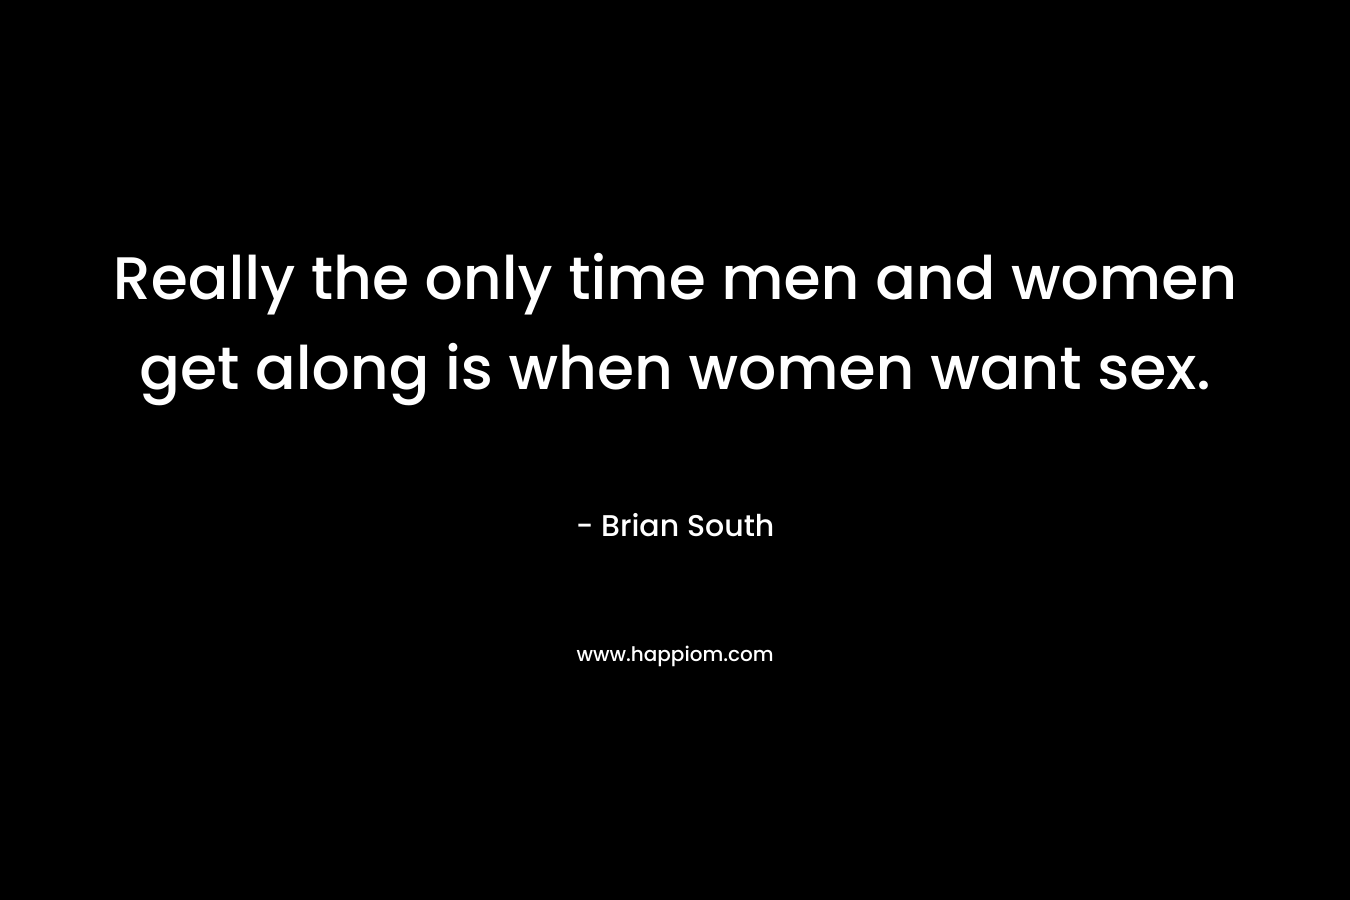 Really the only time men and women get along is when women want sex. – Brian South